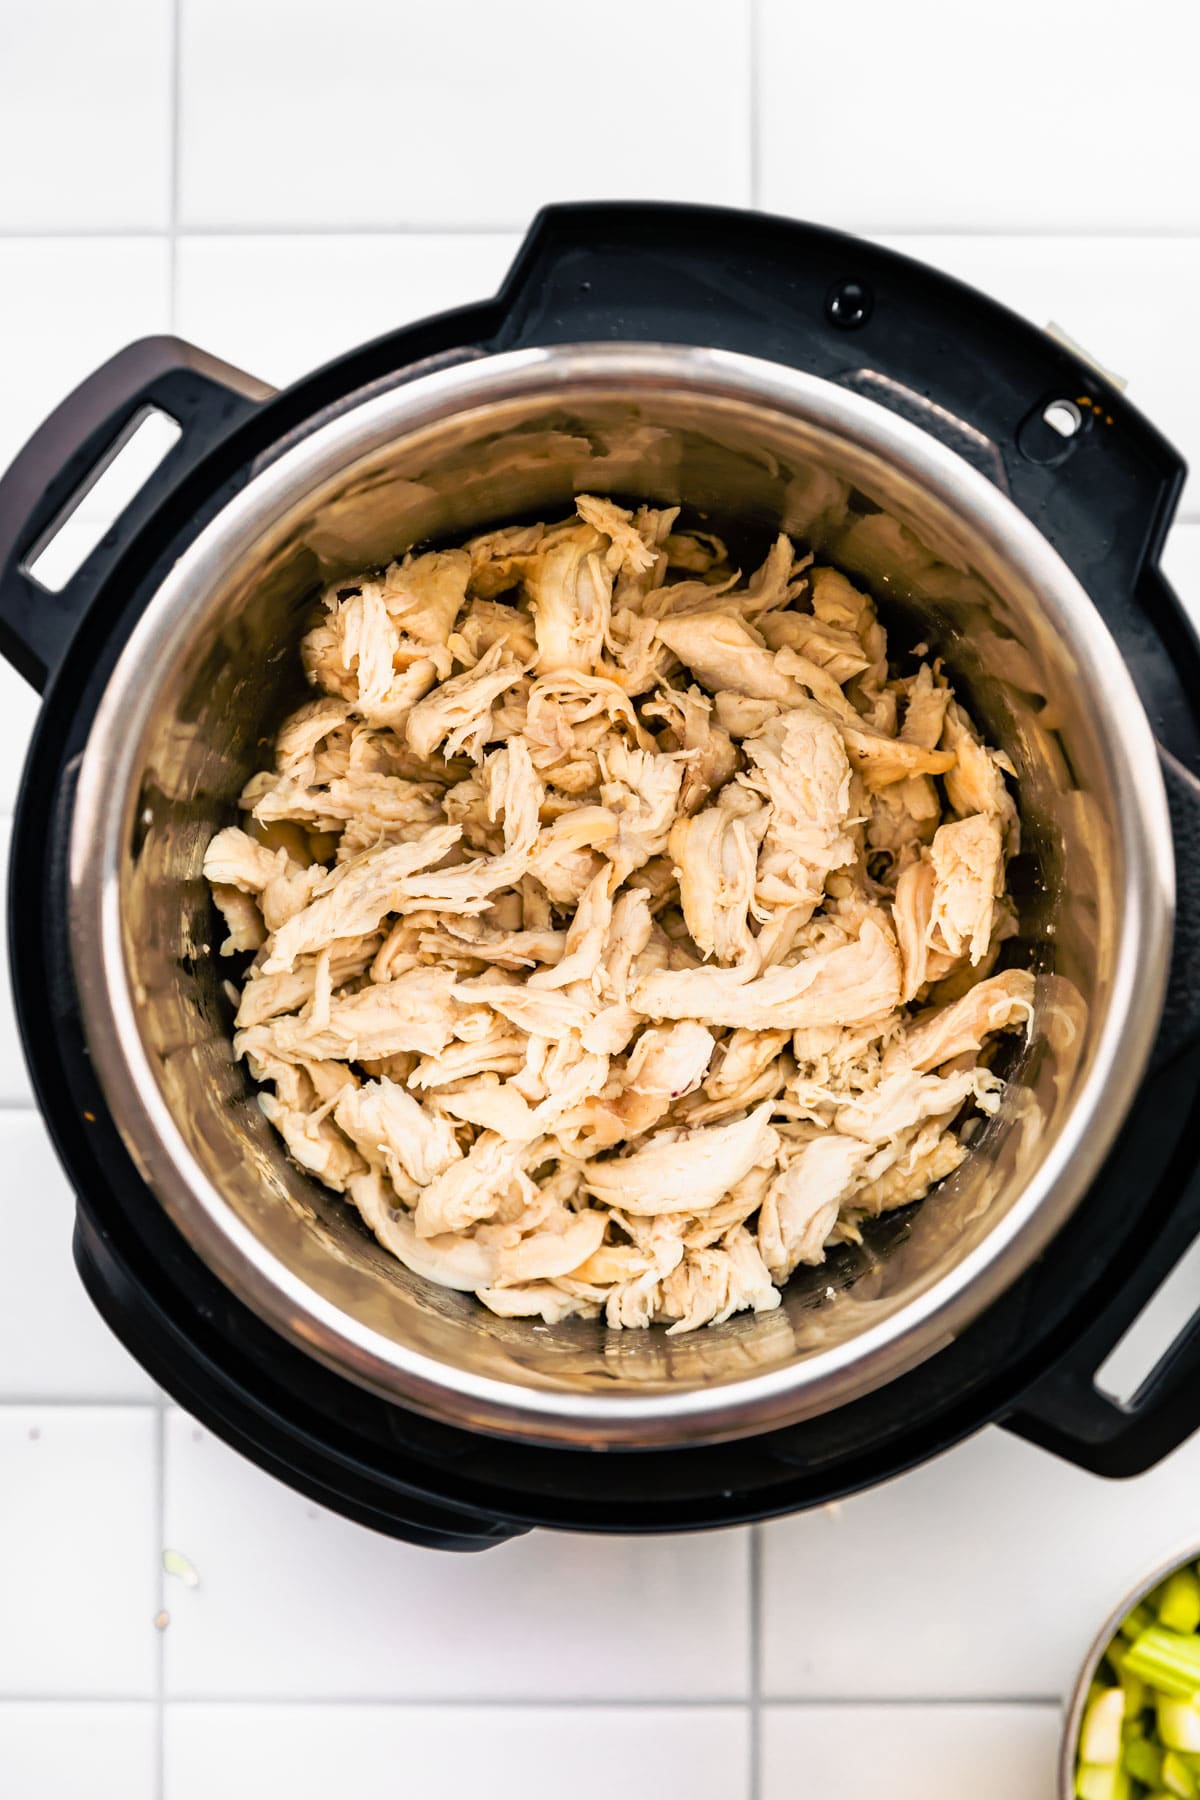 how to make shredded chicken breast meat in a pressure cooker